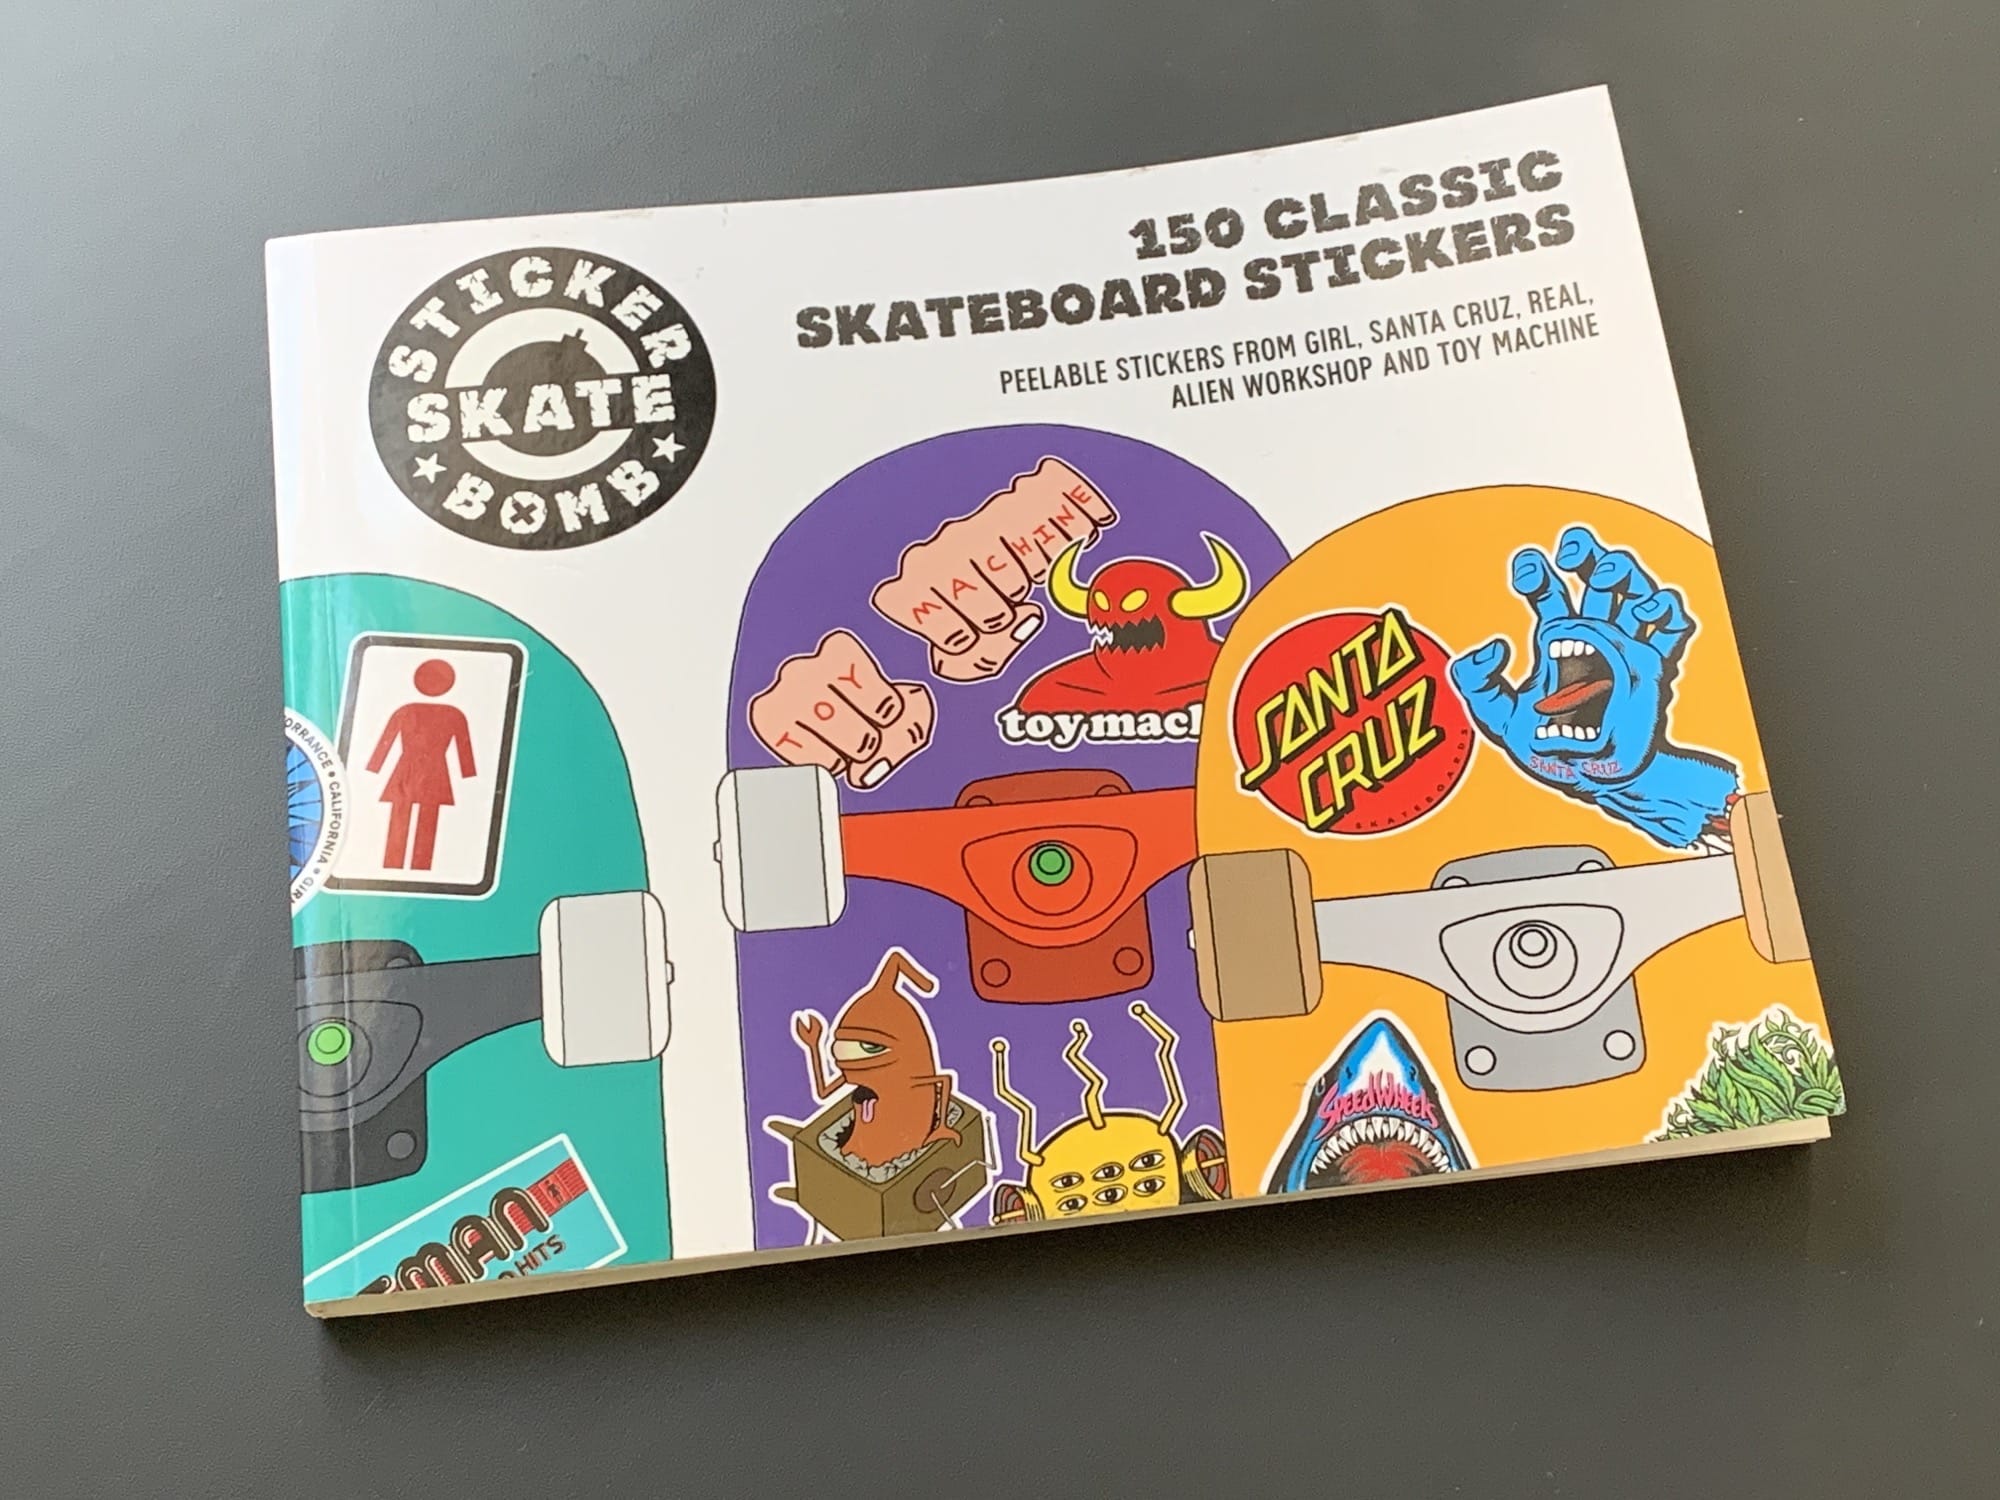 The book 150 Classic Skateboard Stickers is worth every penny if you're looking for MacBook stickers. 